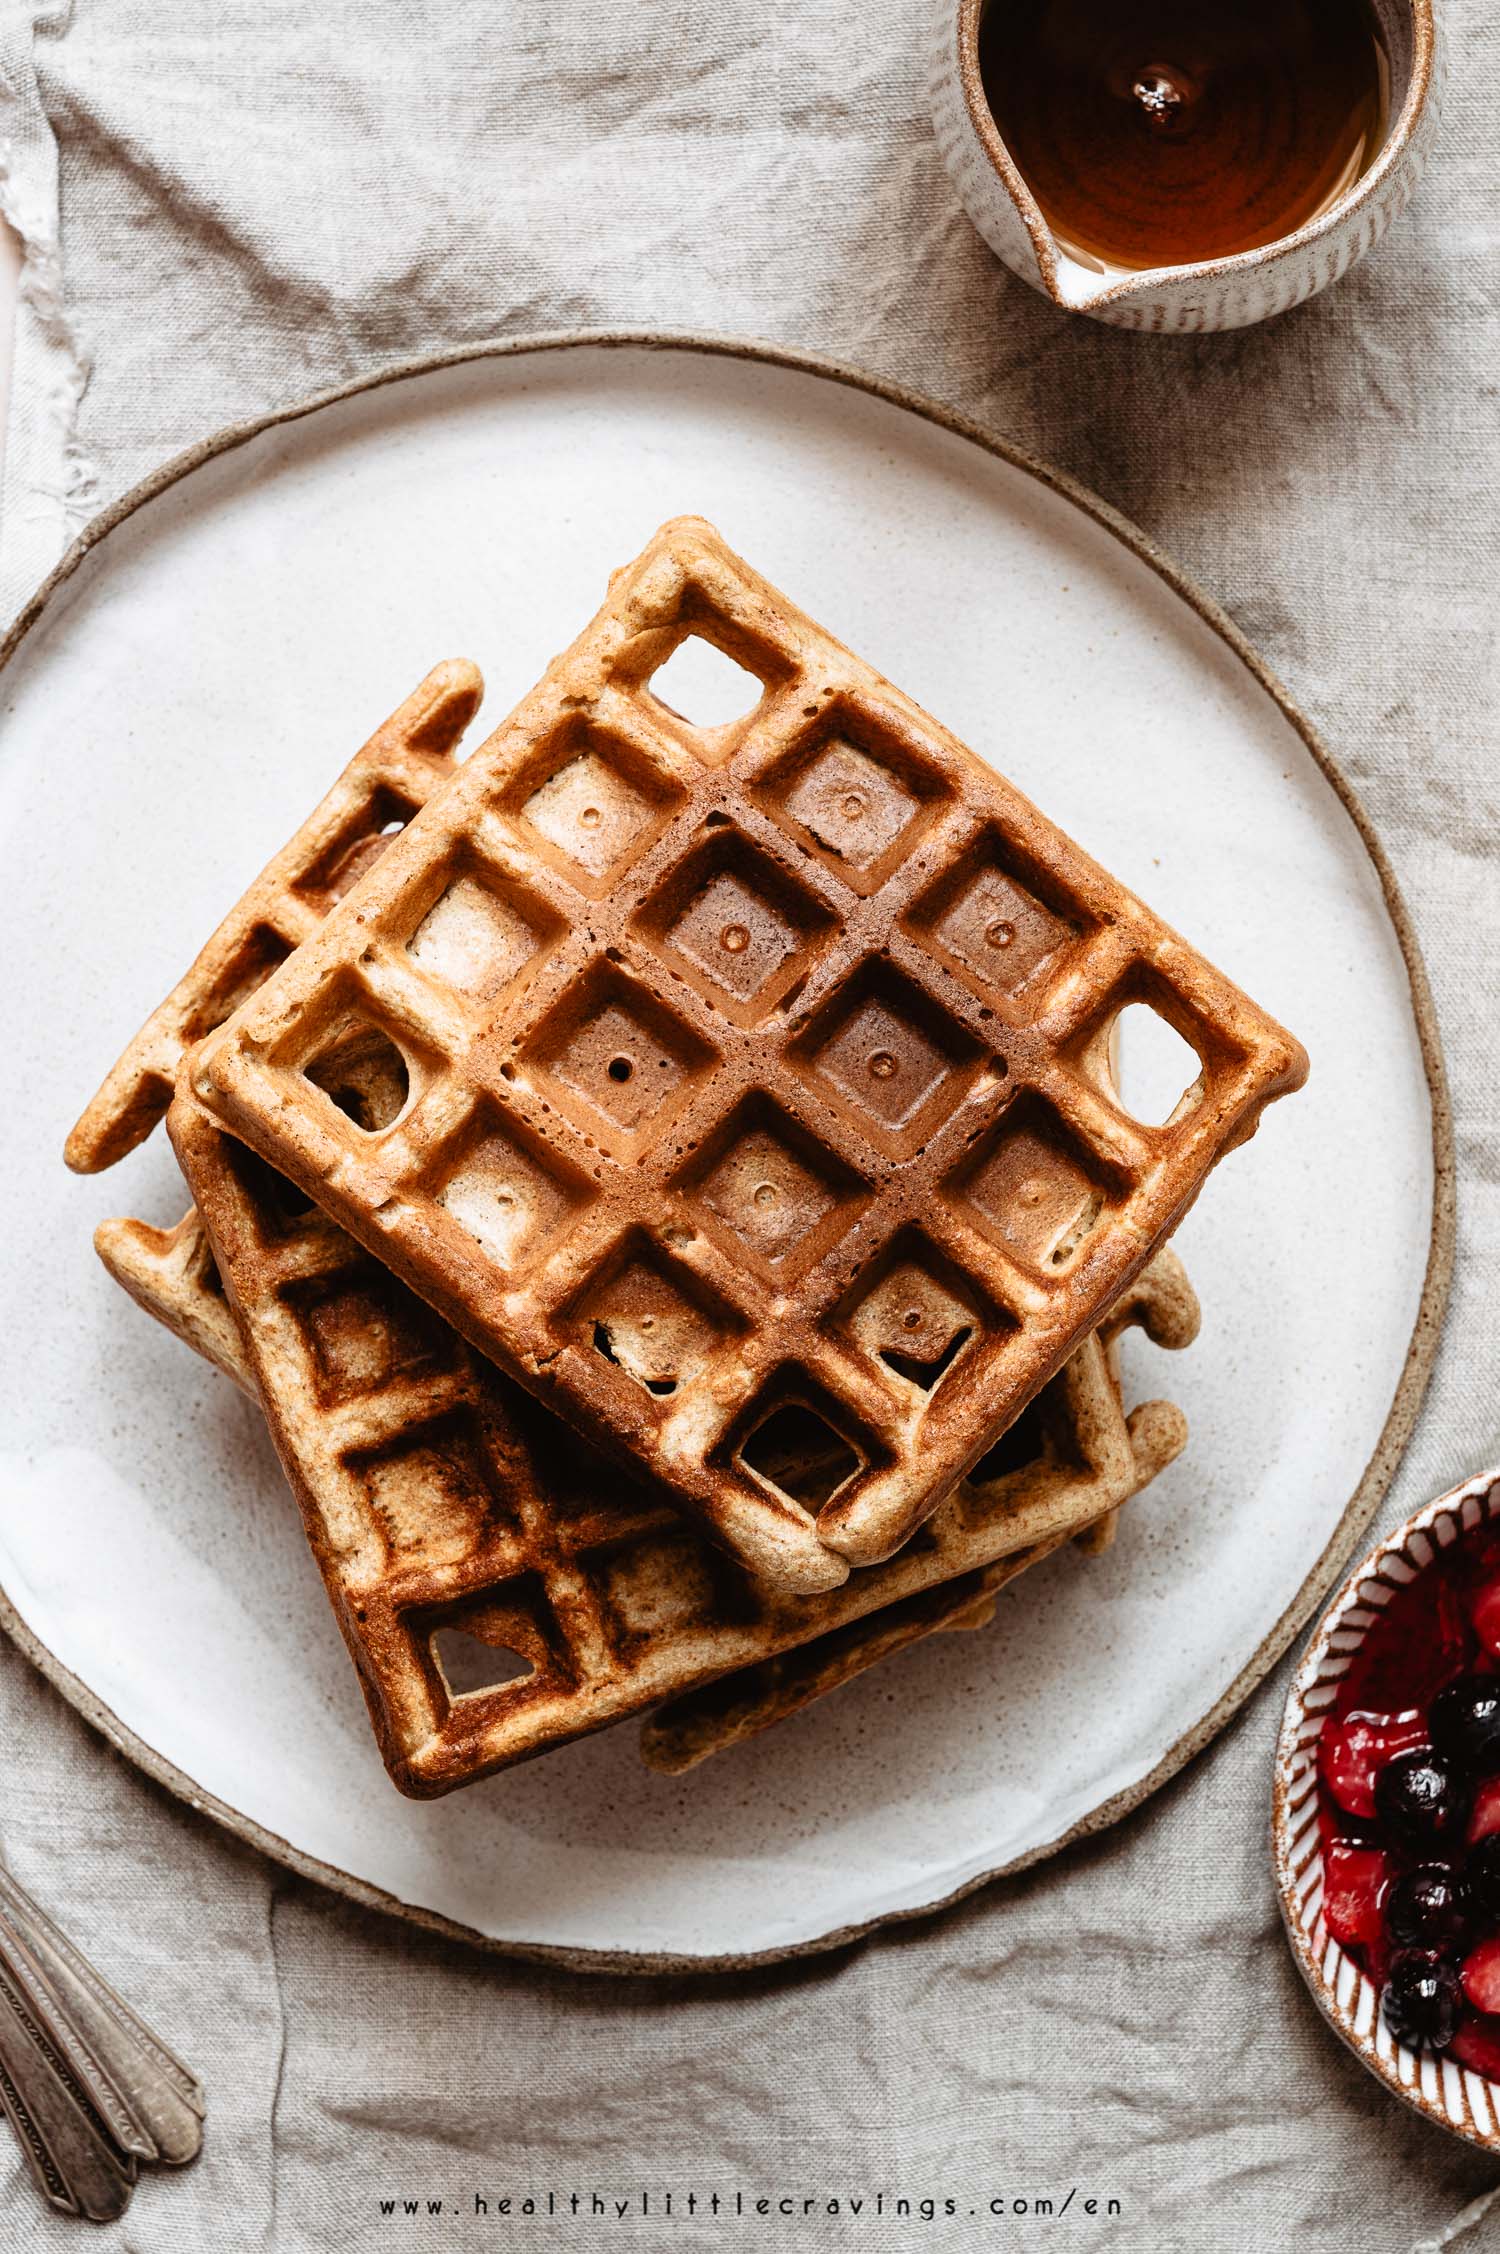 Crispy Waffle Recipe Without Baking Powder - Healthy Little Cravings